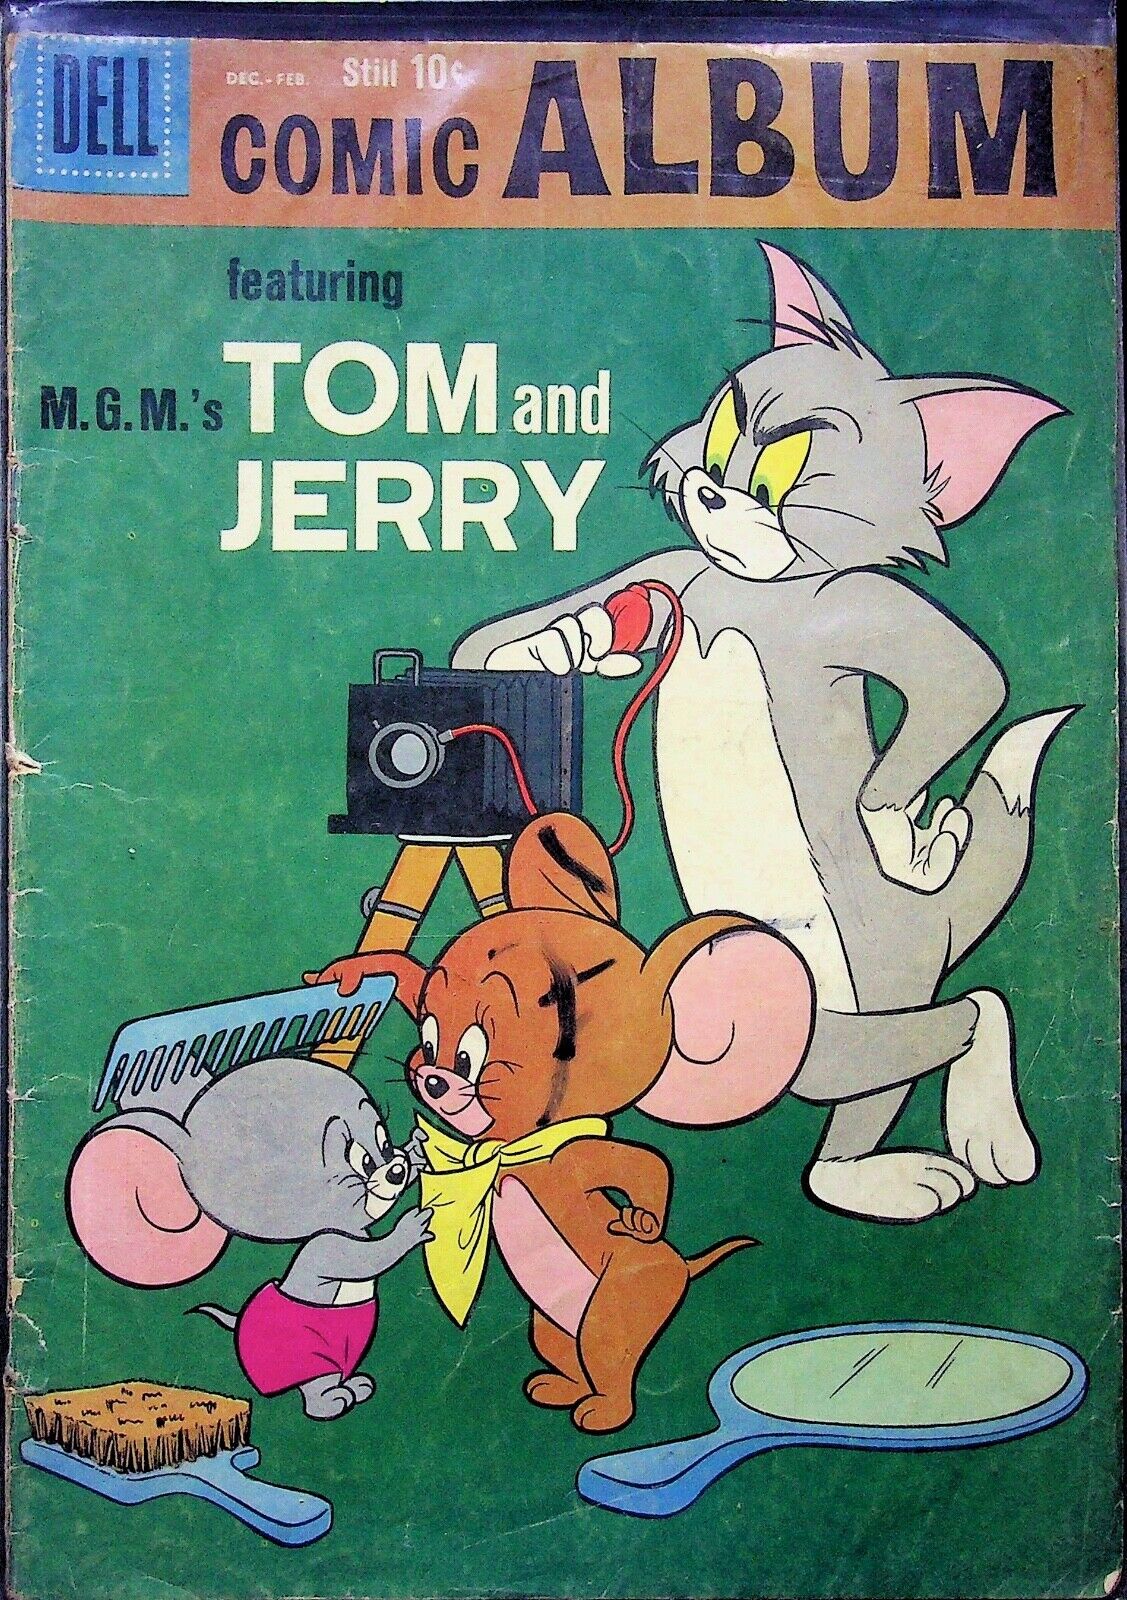 1959 COMIC ALBUM FEATURING TOM AND JERRY'S # 4 DELL COMICS VINTAGE COMIC BOOK